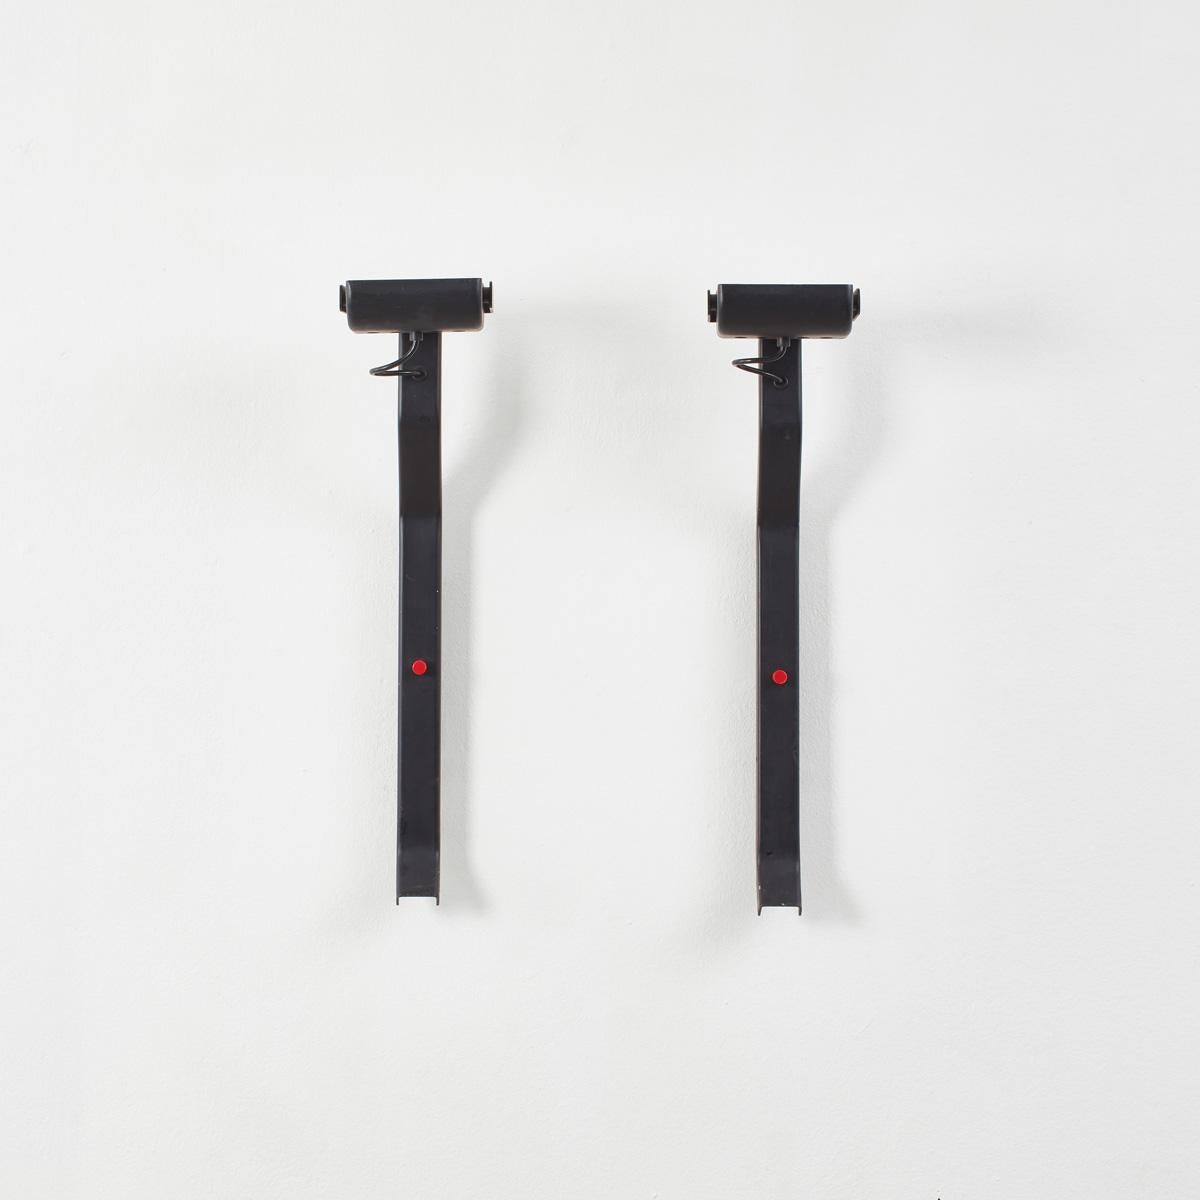 Designed for Sirrah, these wall lights are a very good example of Kazuhide Takahama’s minimal futurist aesthetic – with clean lines and formal restraint. Takahama was born in Japan in 1930 and after completing his studies in Architecture in Tokyo he